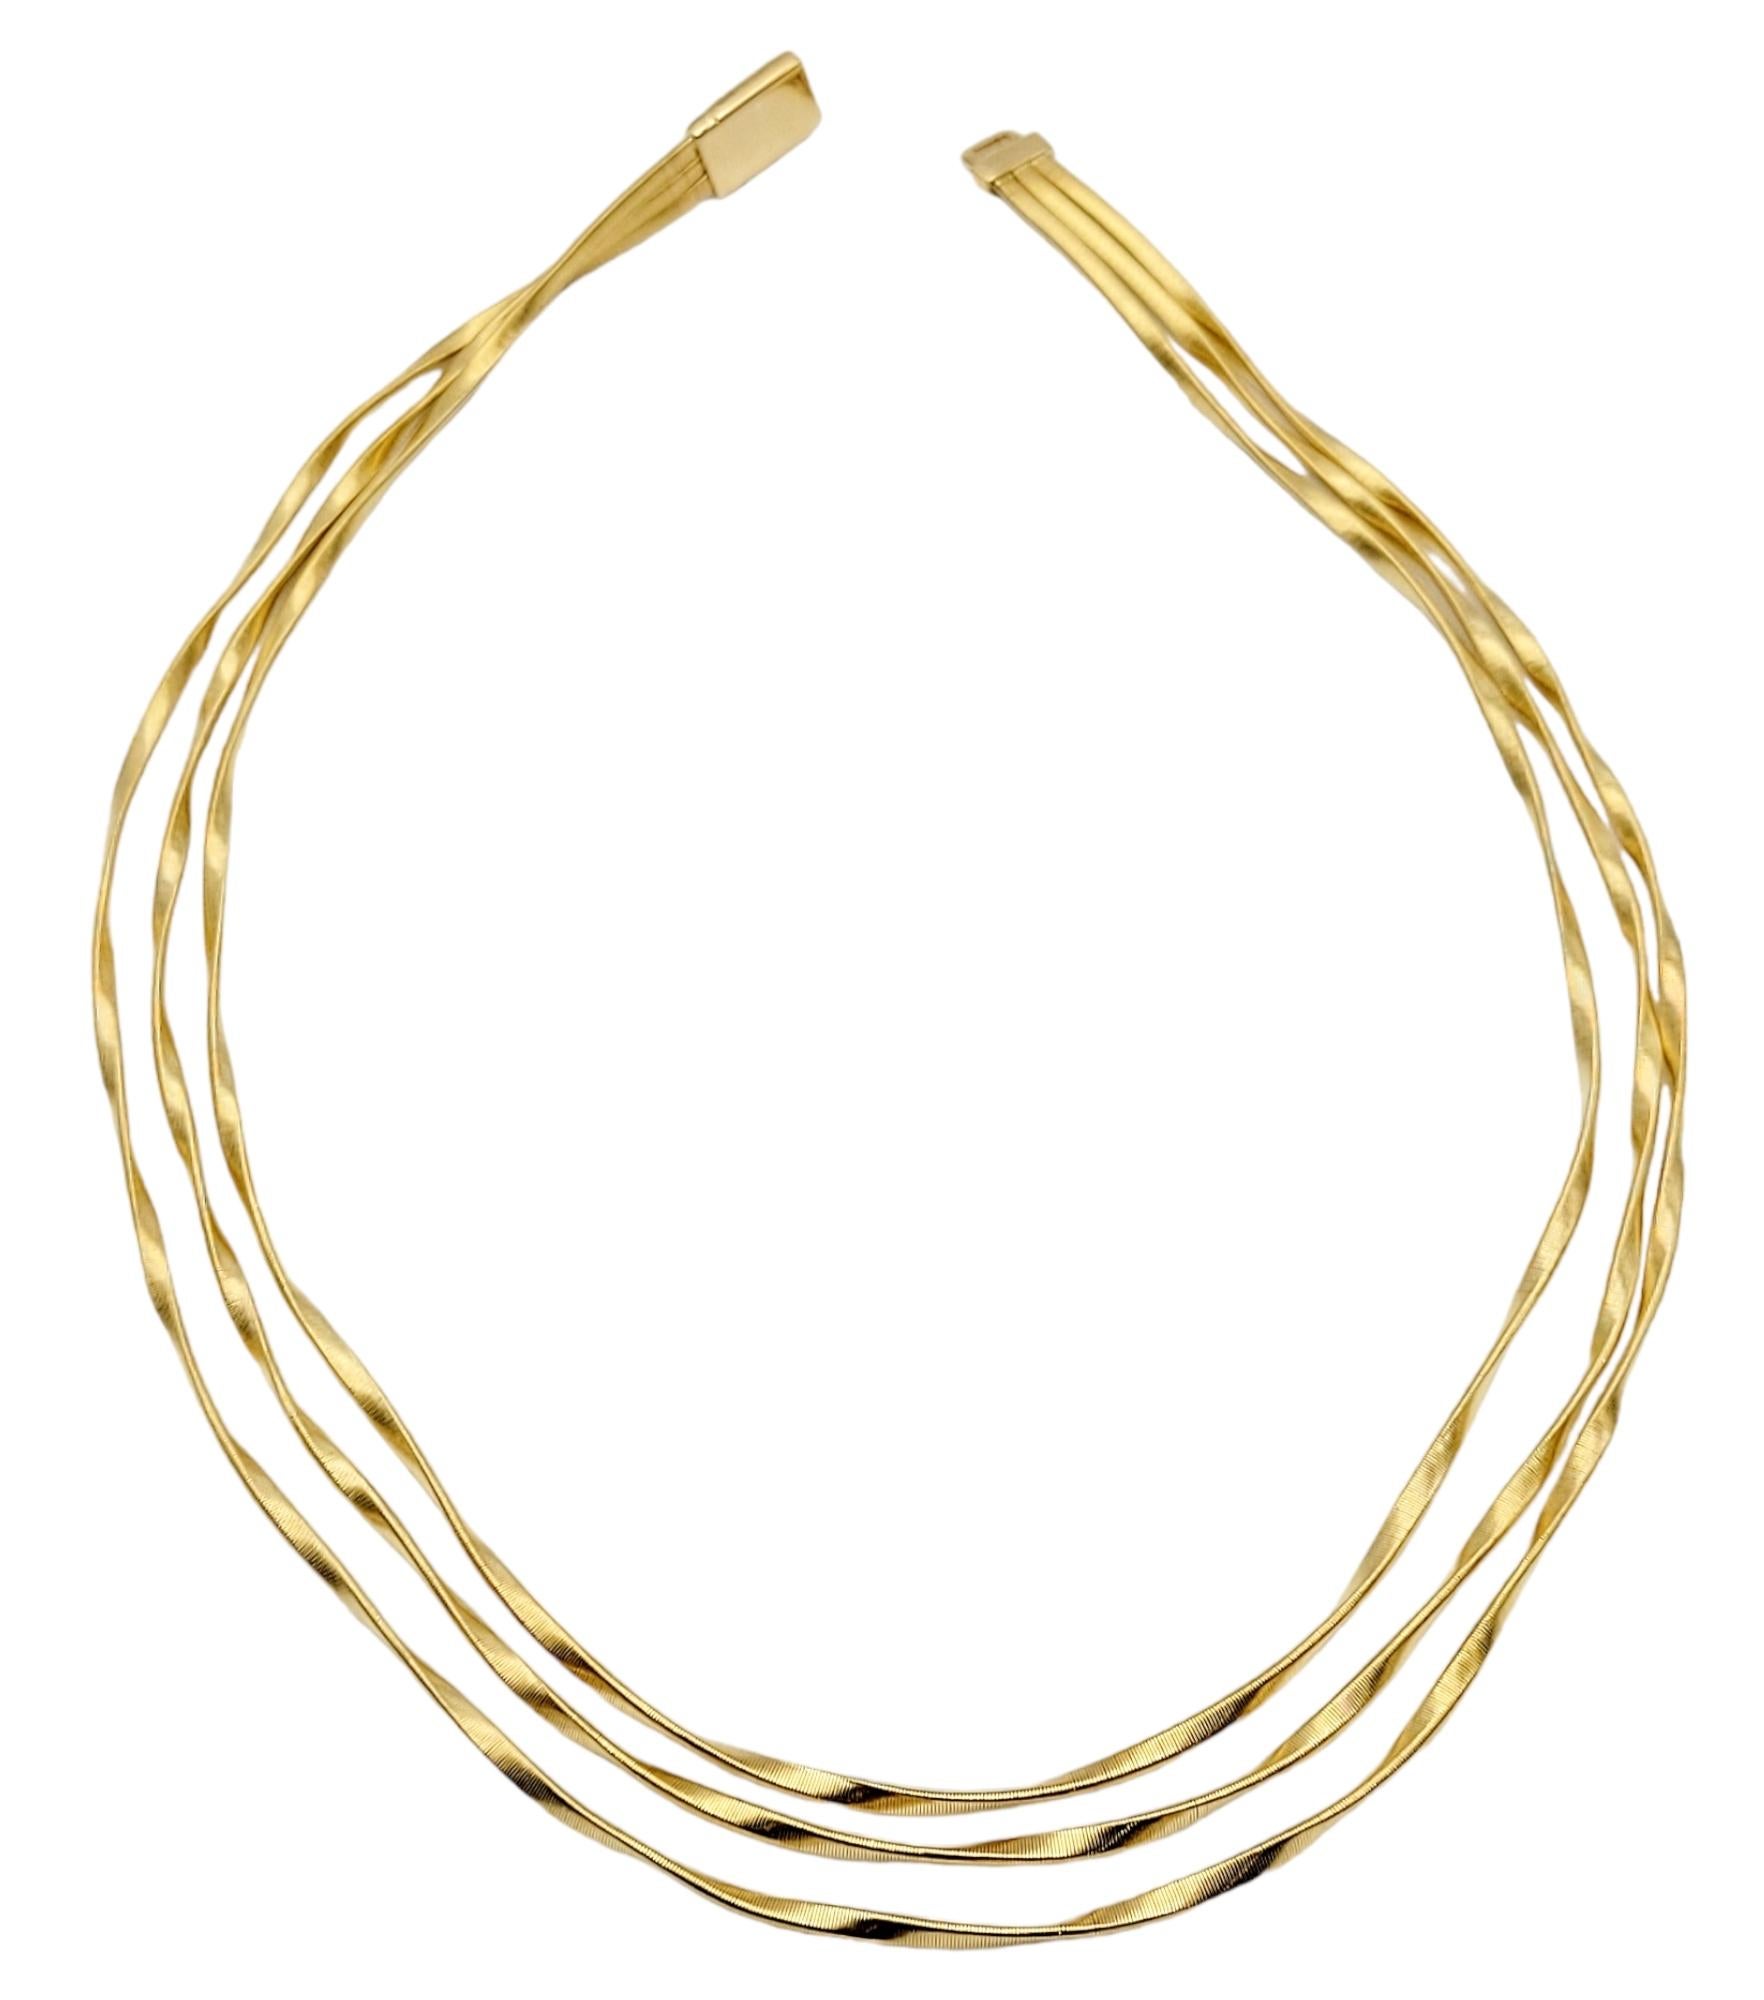 MarCo Bicego Marrakech Collection Three-Strand Necklace in 18 Karat Yellow Gold For Sale 3